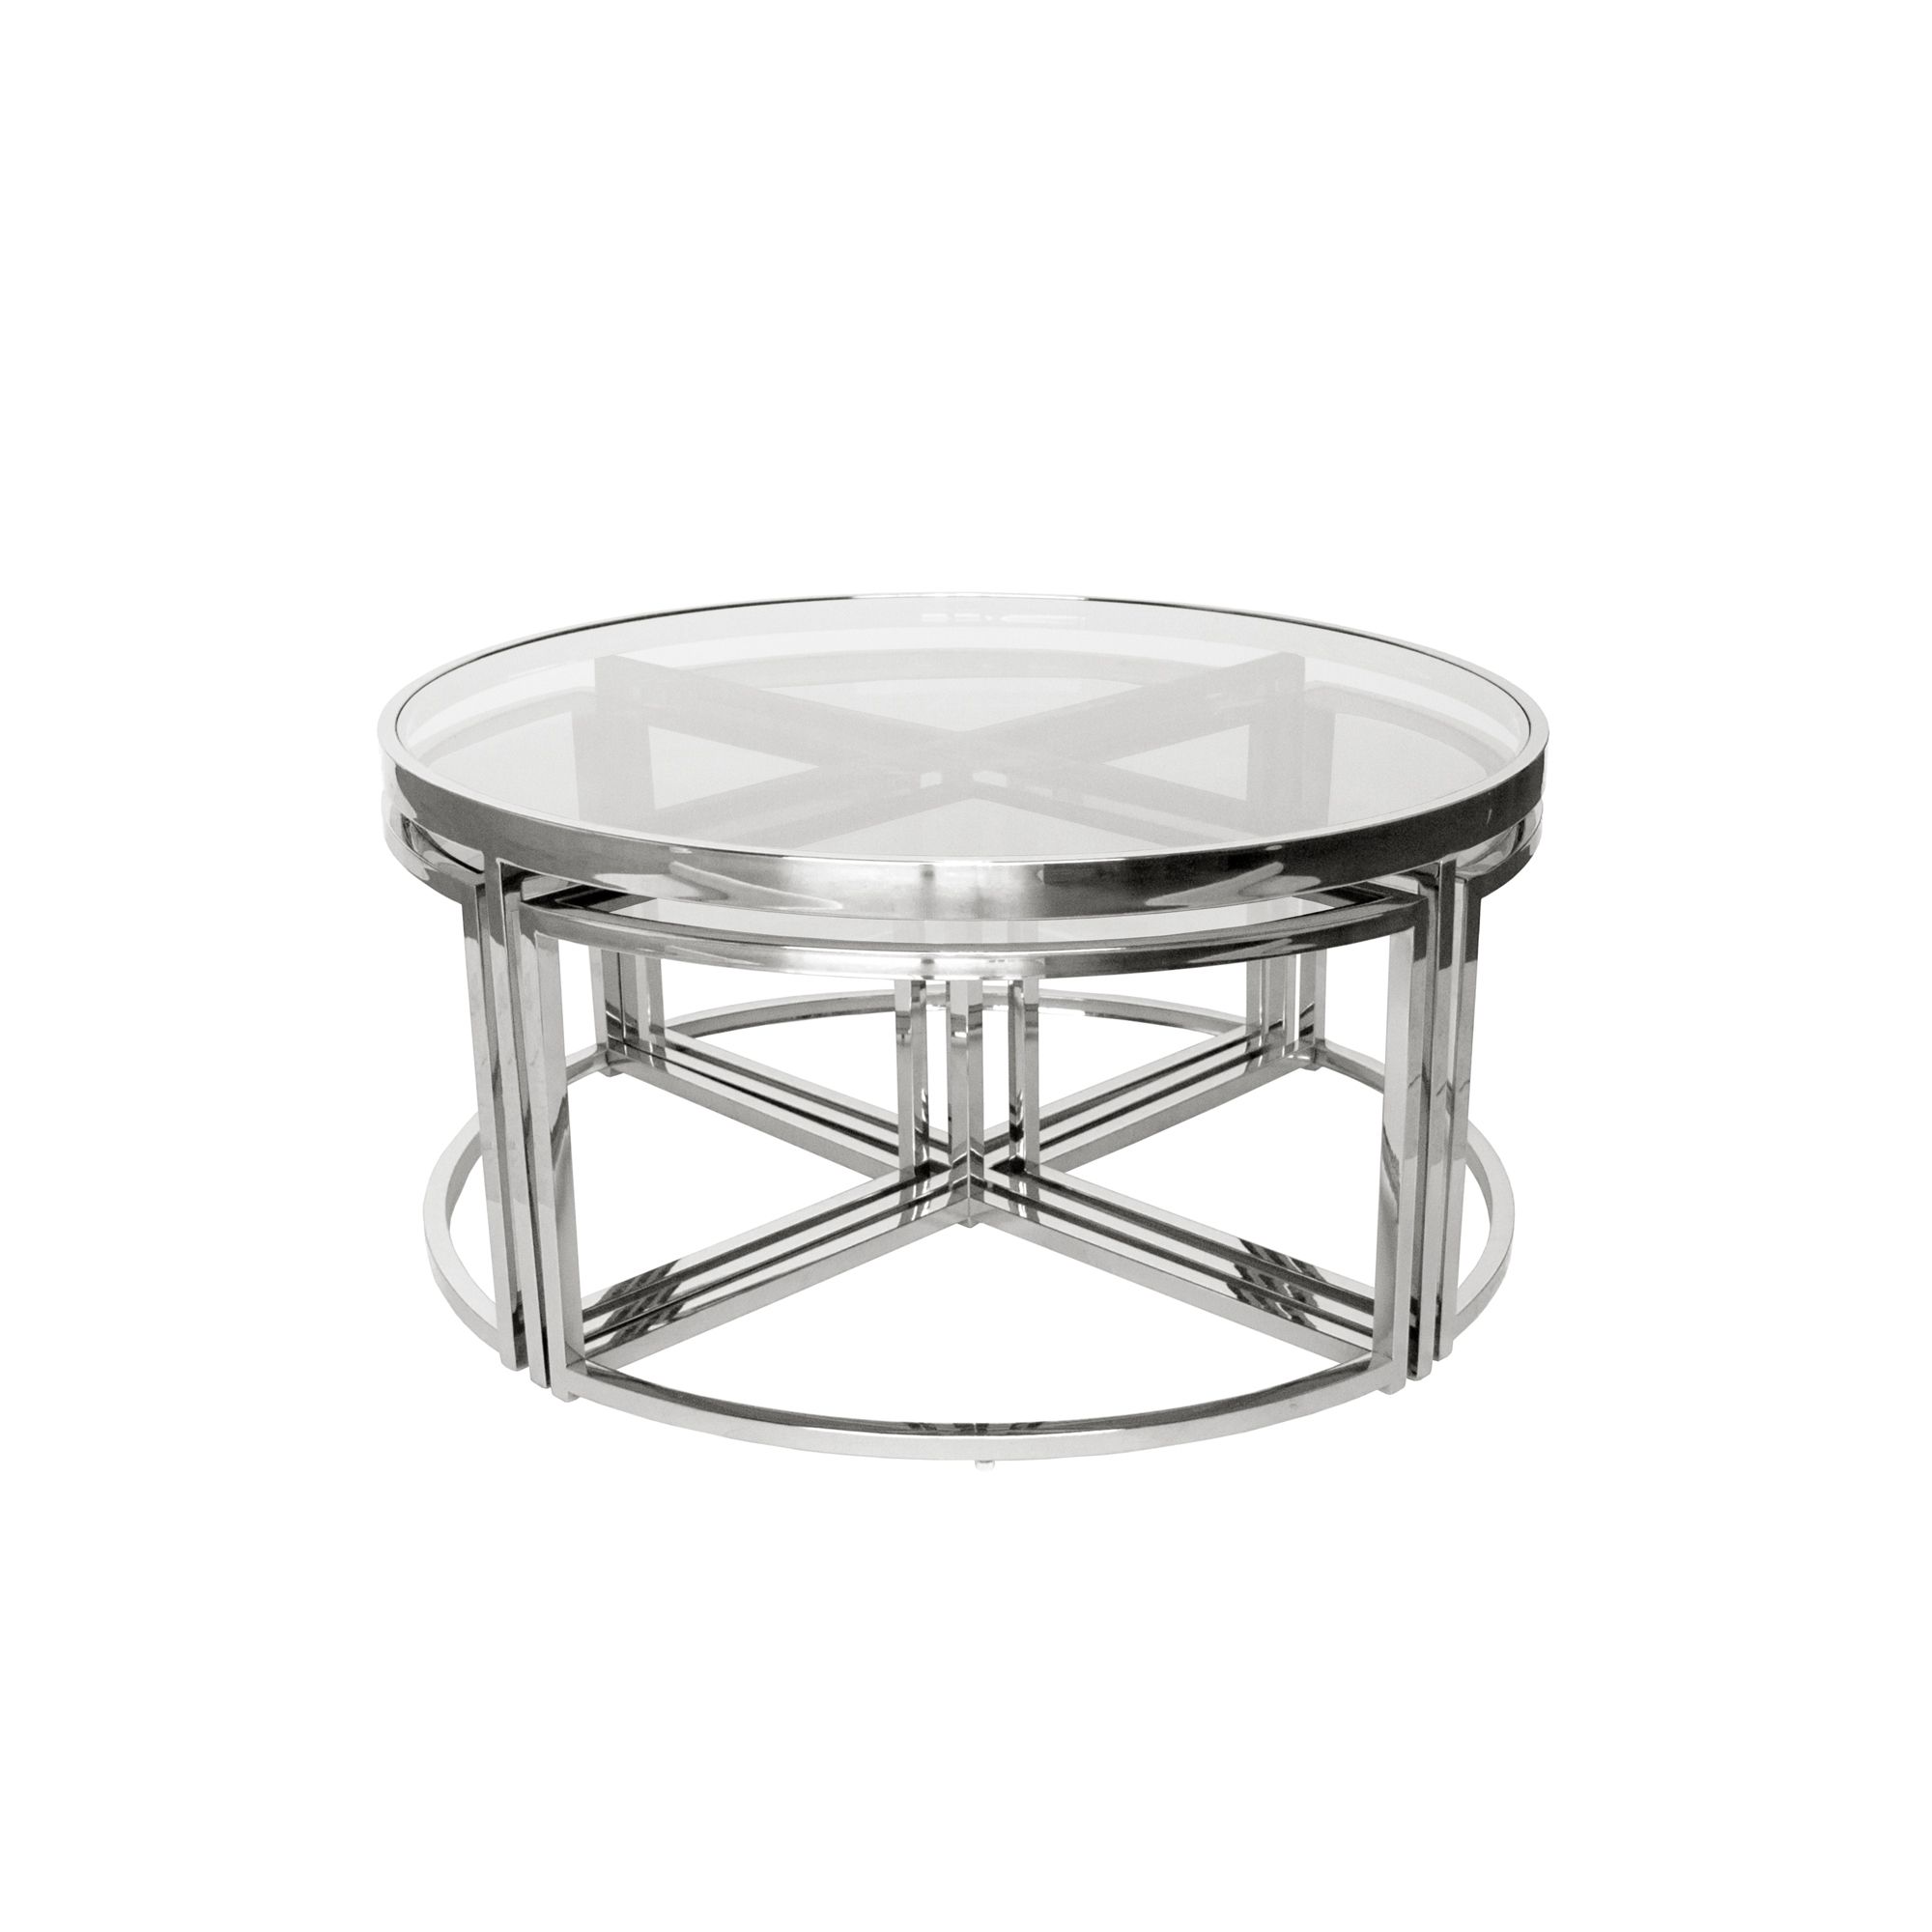 Clear Coffee Tables Pertaining To Most Recent Silver Perugia Nesting Coffee Table – Clear Glass – Darcy (View 8 of 20)